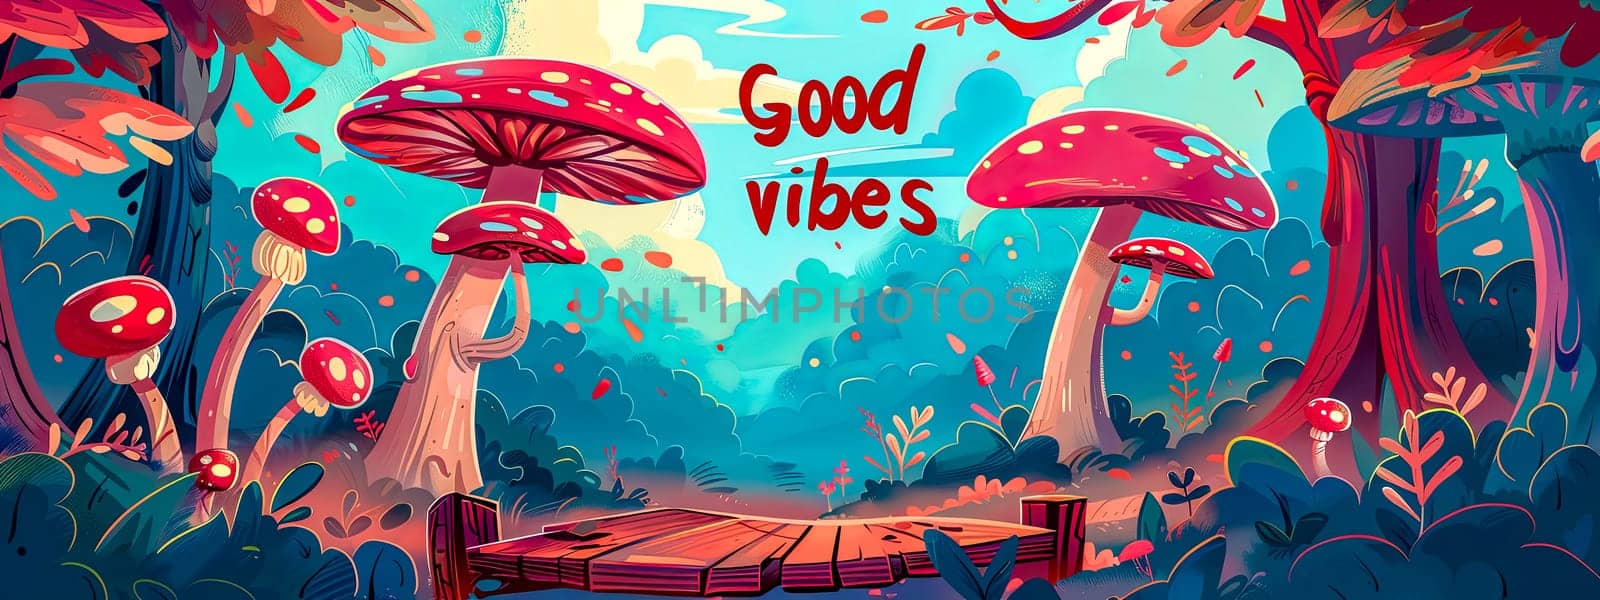 Enchanted forest scene with good vibes message by Edophoto